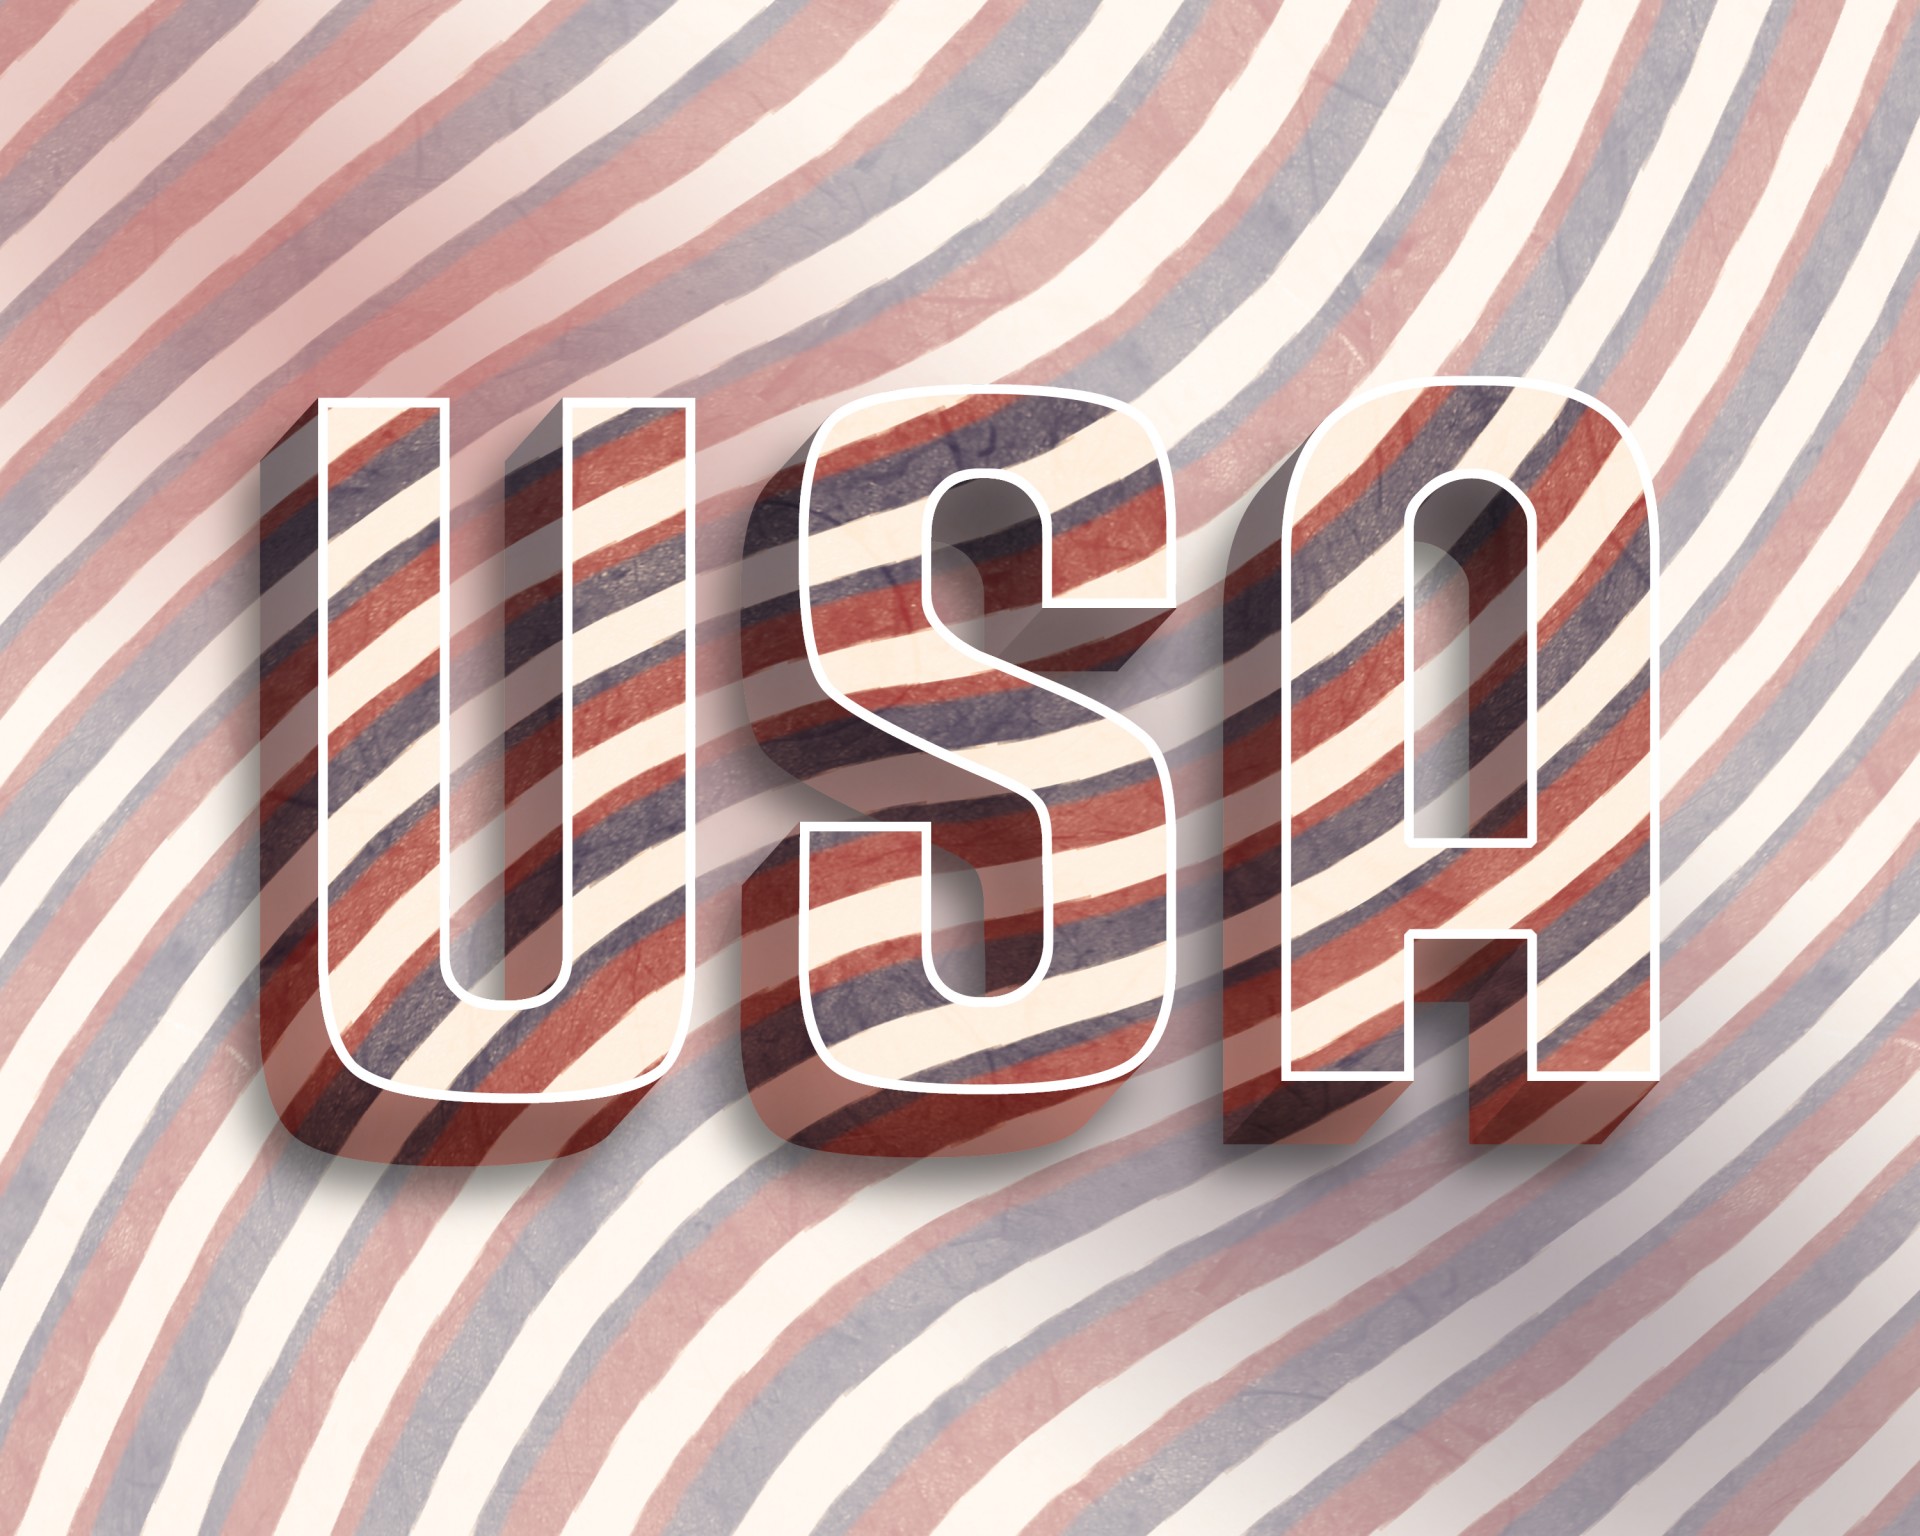 USA On Red White Blue Background